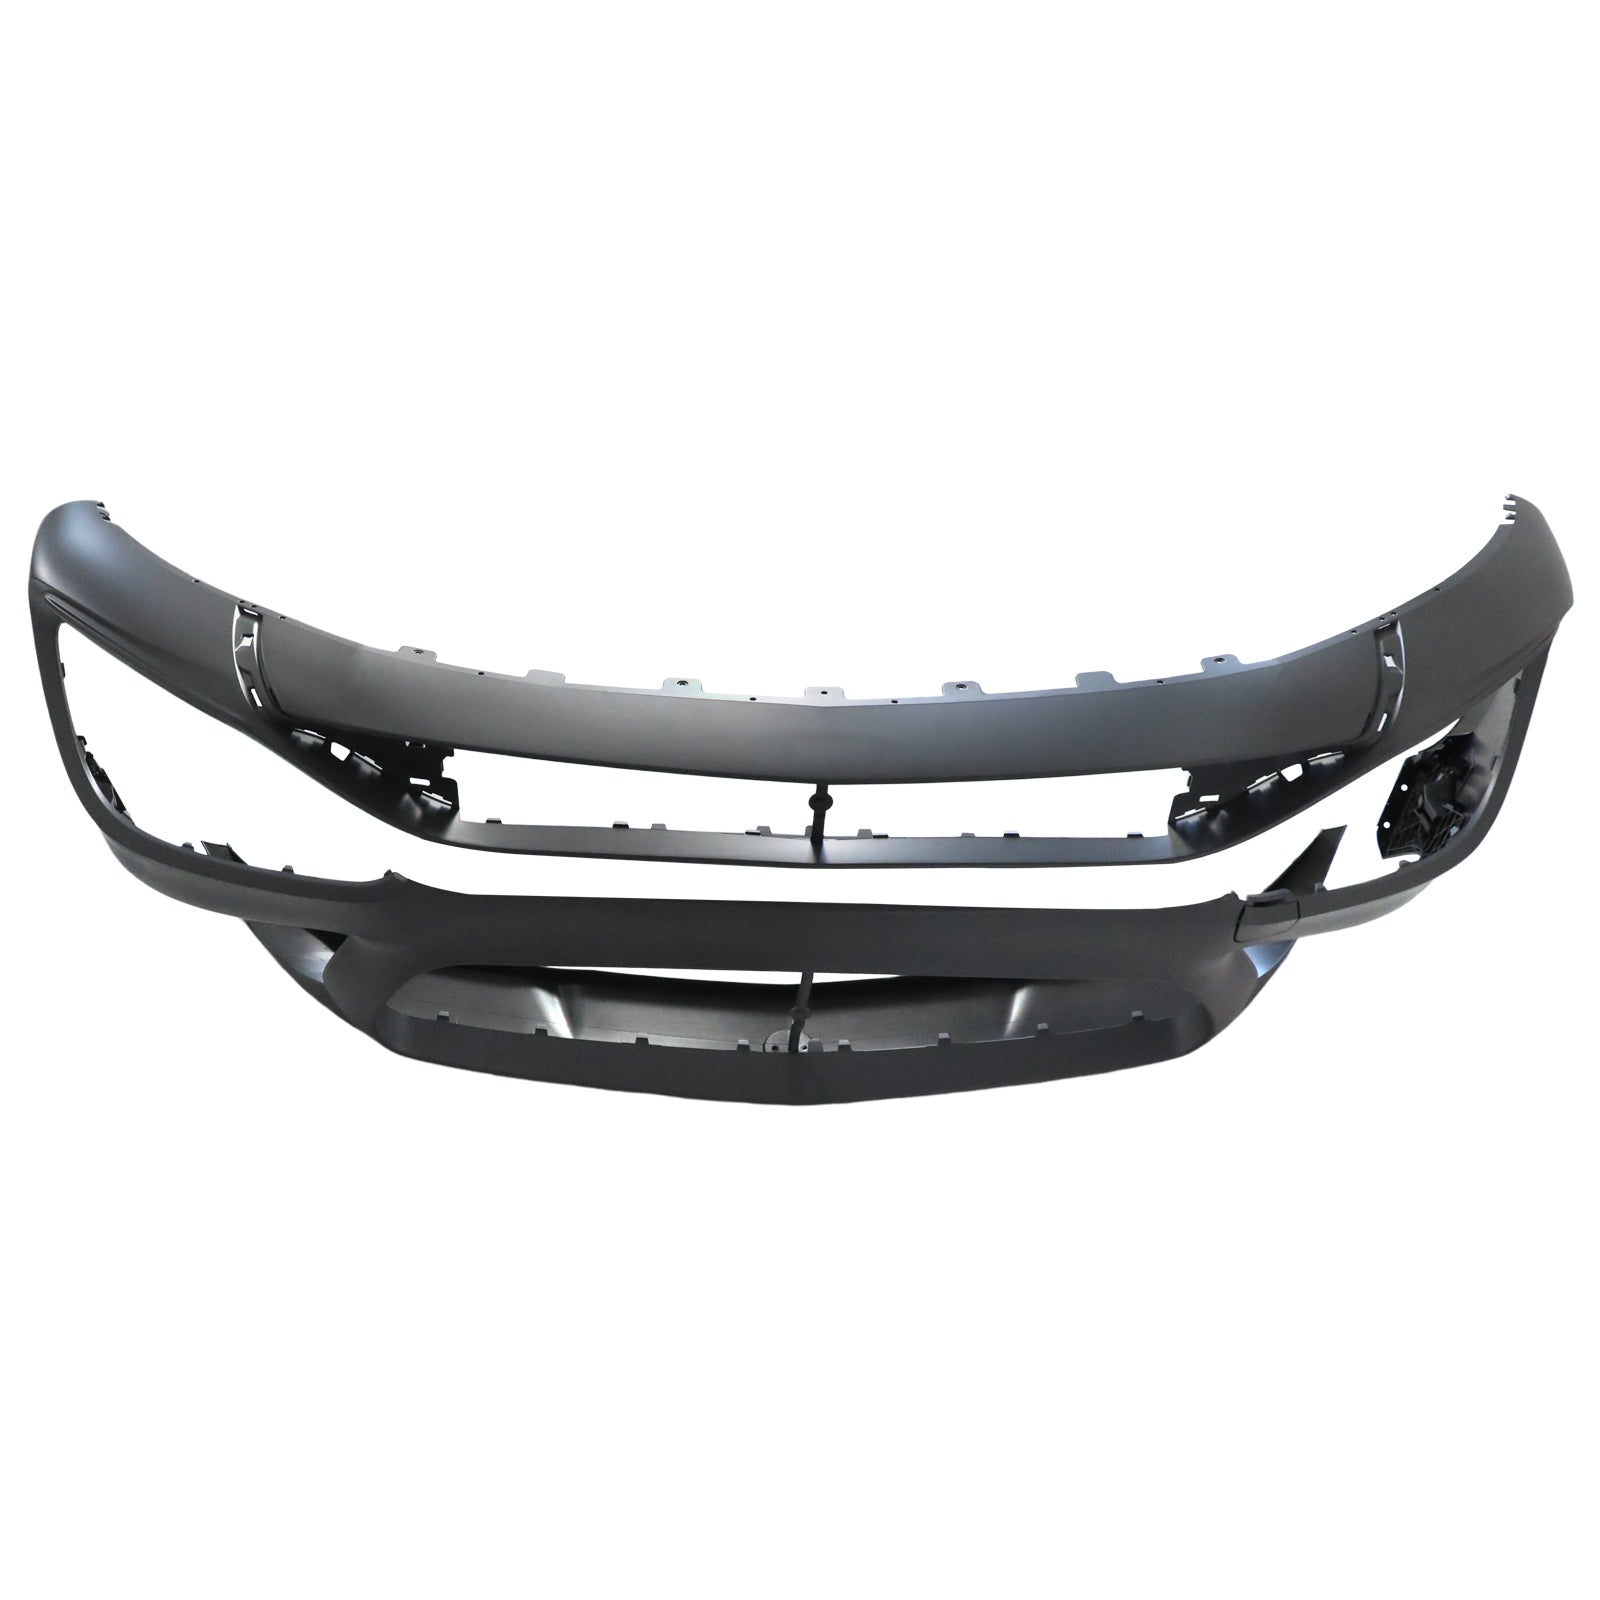 Mercedes Benz 2013-2019 W117 CLA-Class facelift to CLA AMG 45 style Bumper Body Kit